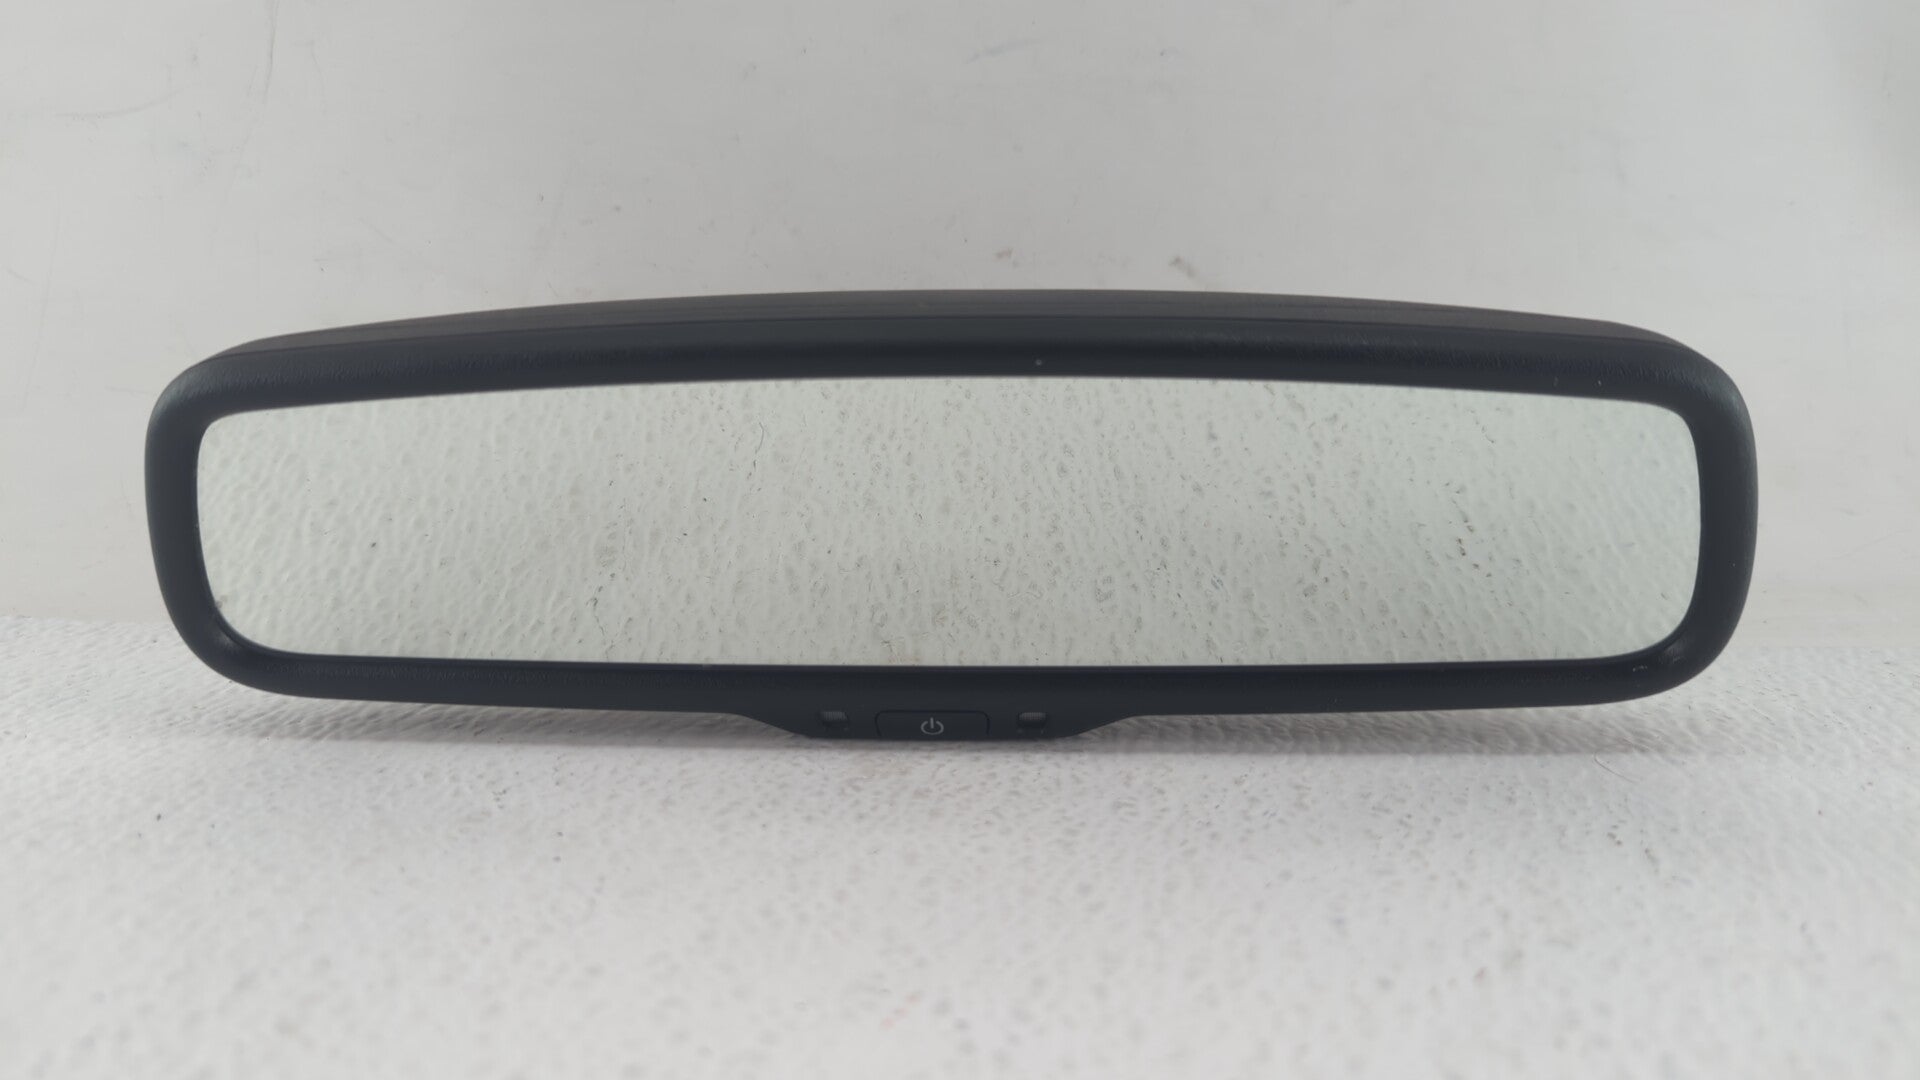 2008-2015 Acura Rdx Interior Rear View Mirror Replacement OEM Fits 2004 2005 2006 2007 2008 2009 2010 2011 2012 2013 2014 2015 OEM Used Auto Parts - Oemusedautoparts1.com